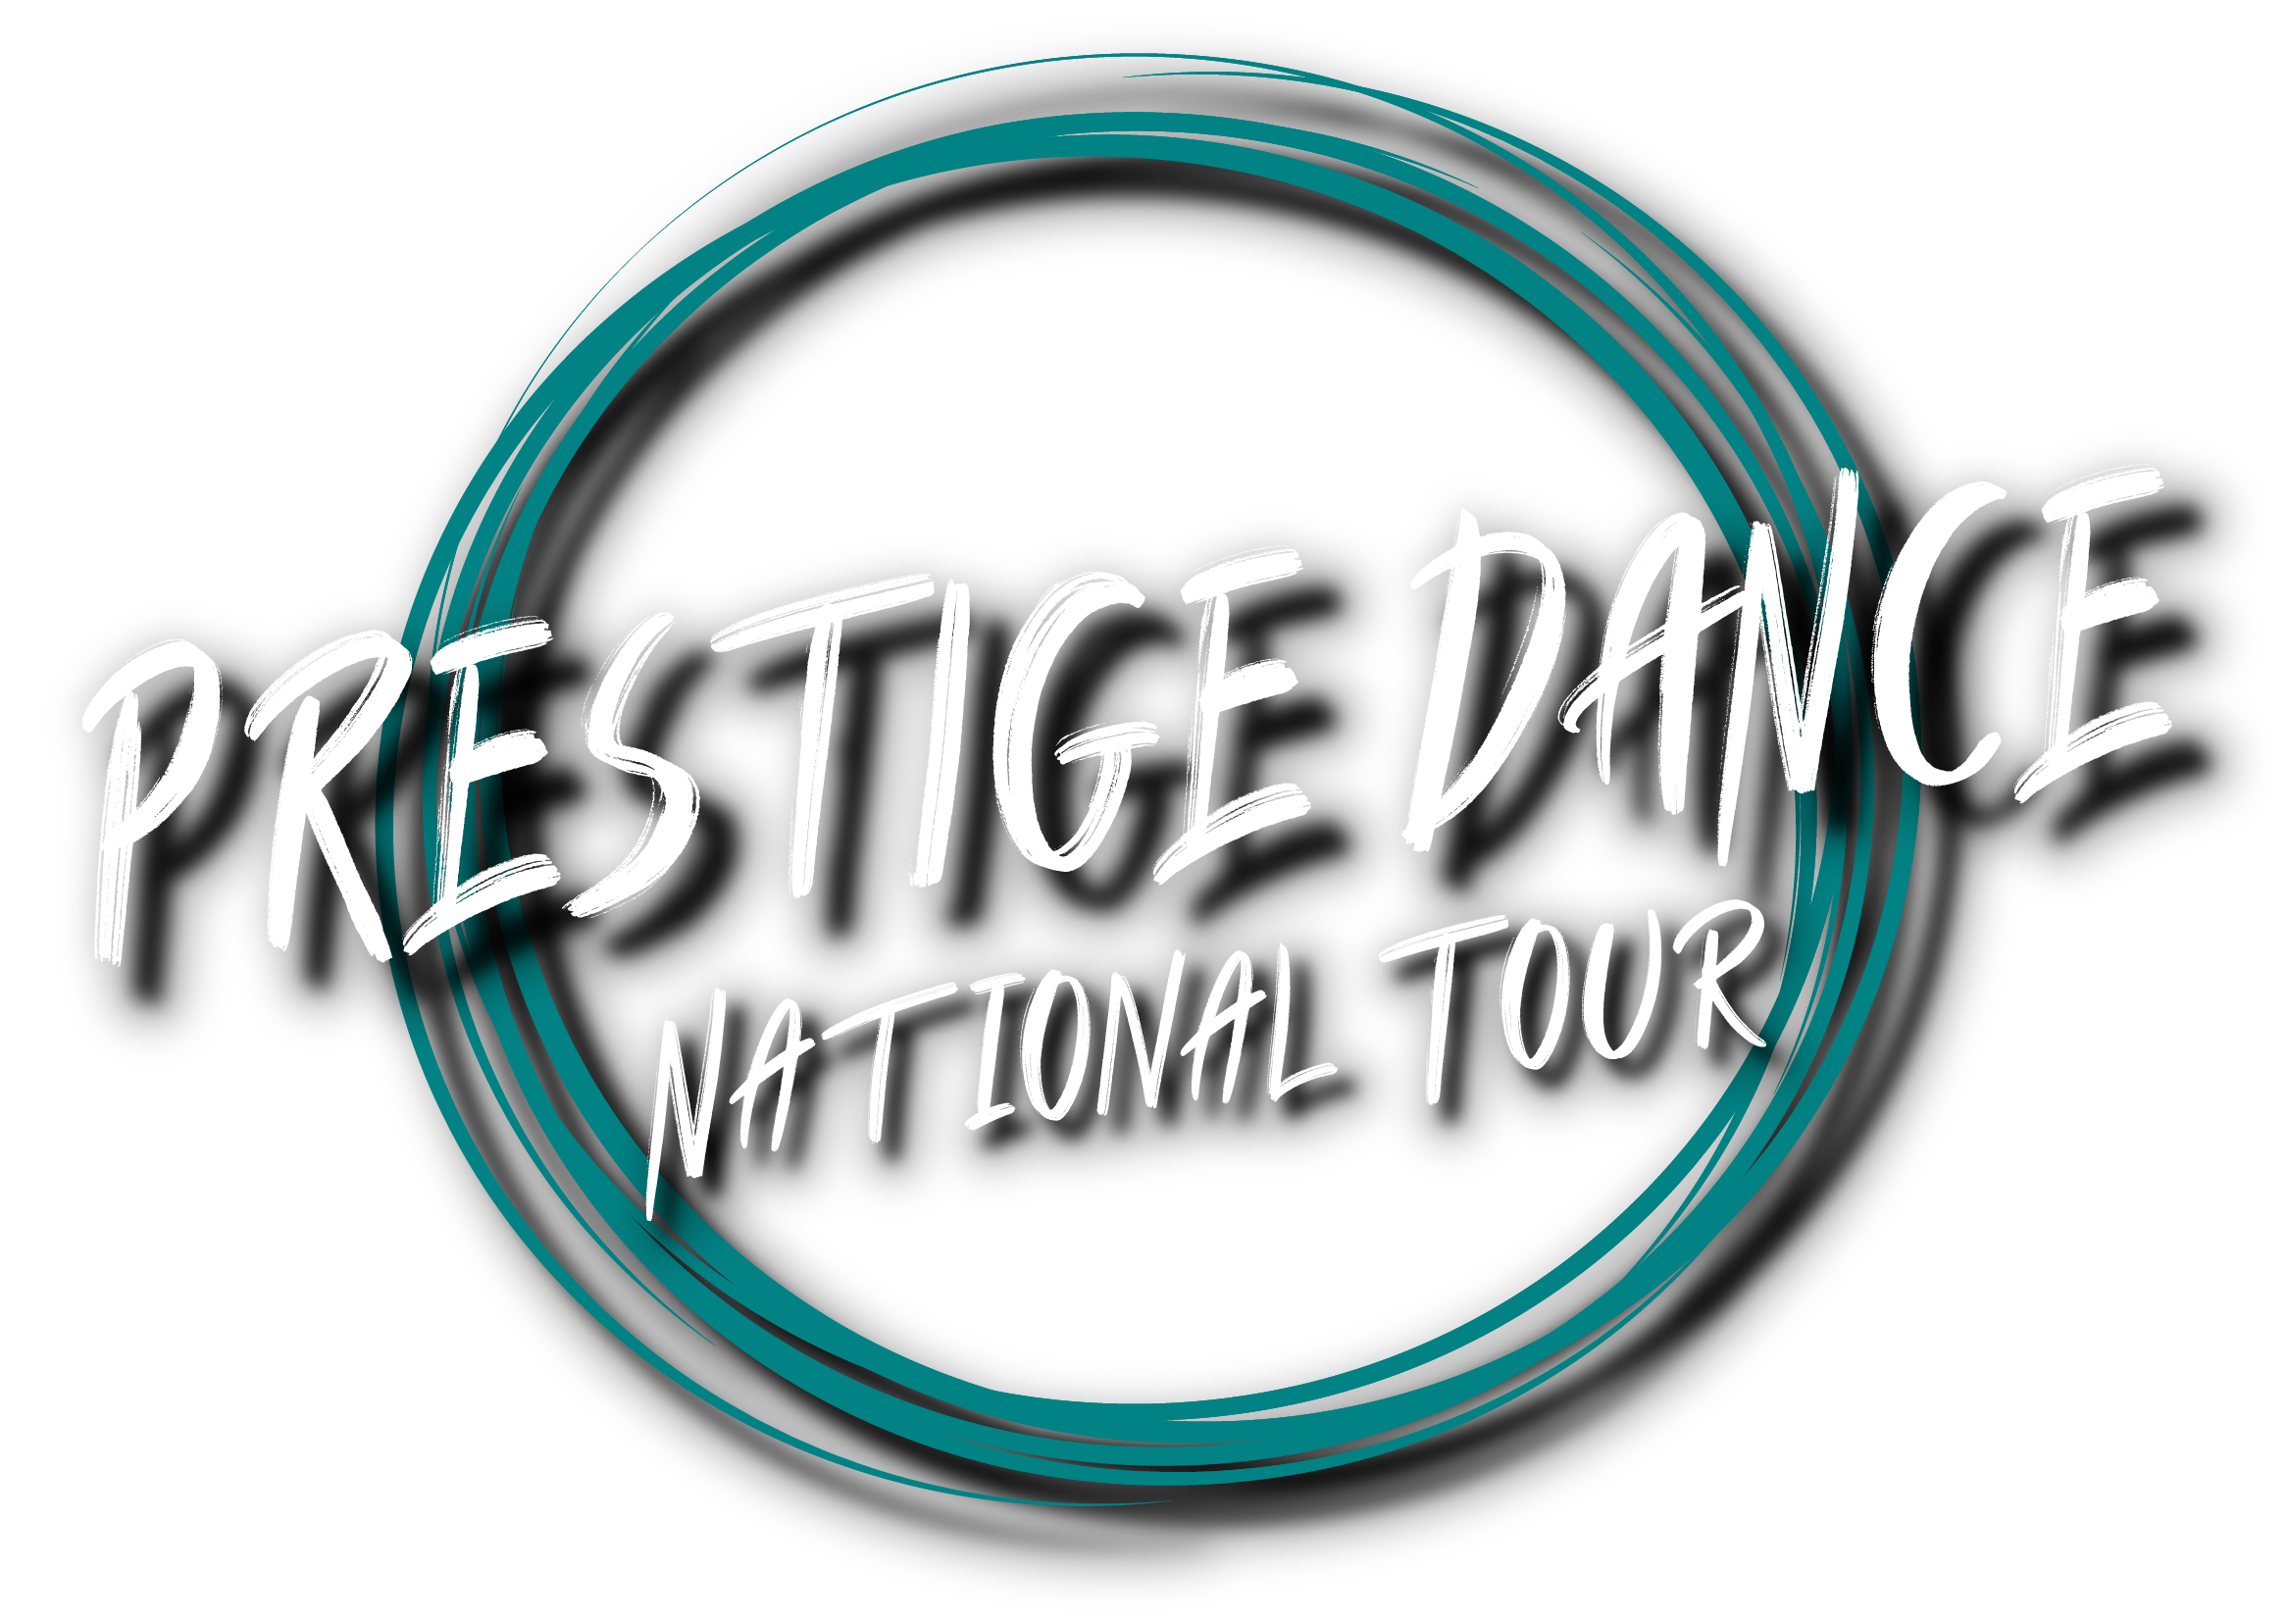 Our Story — Prestige Dance National Tour